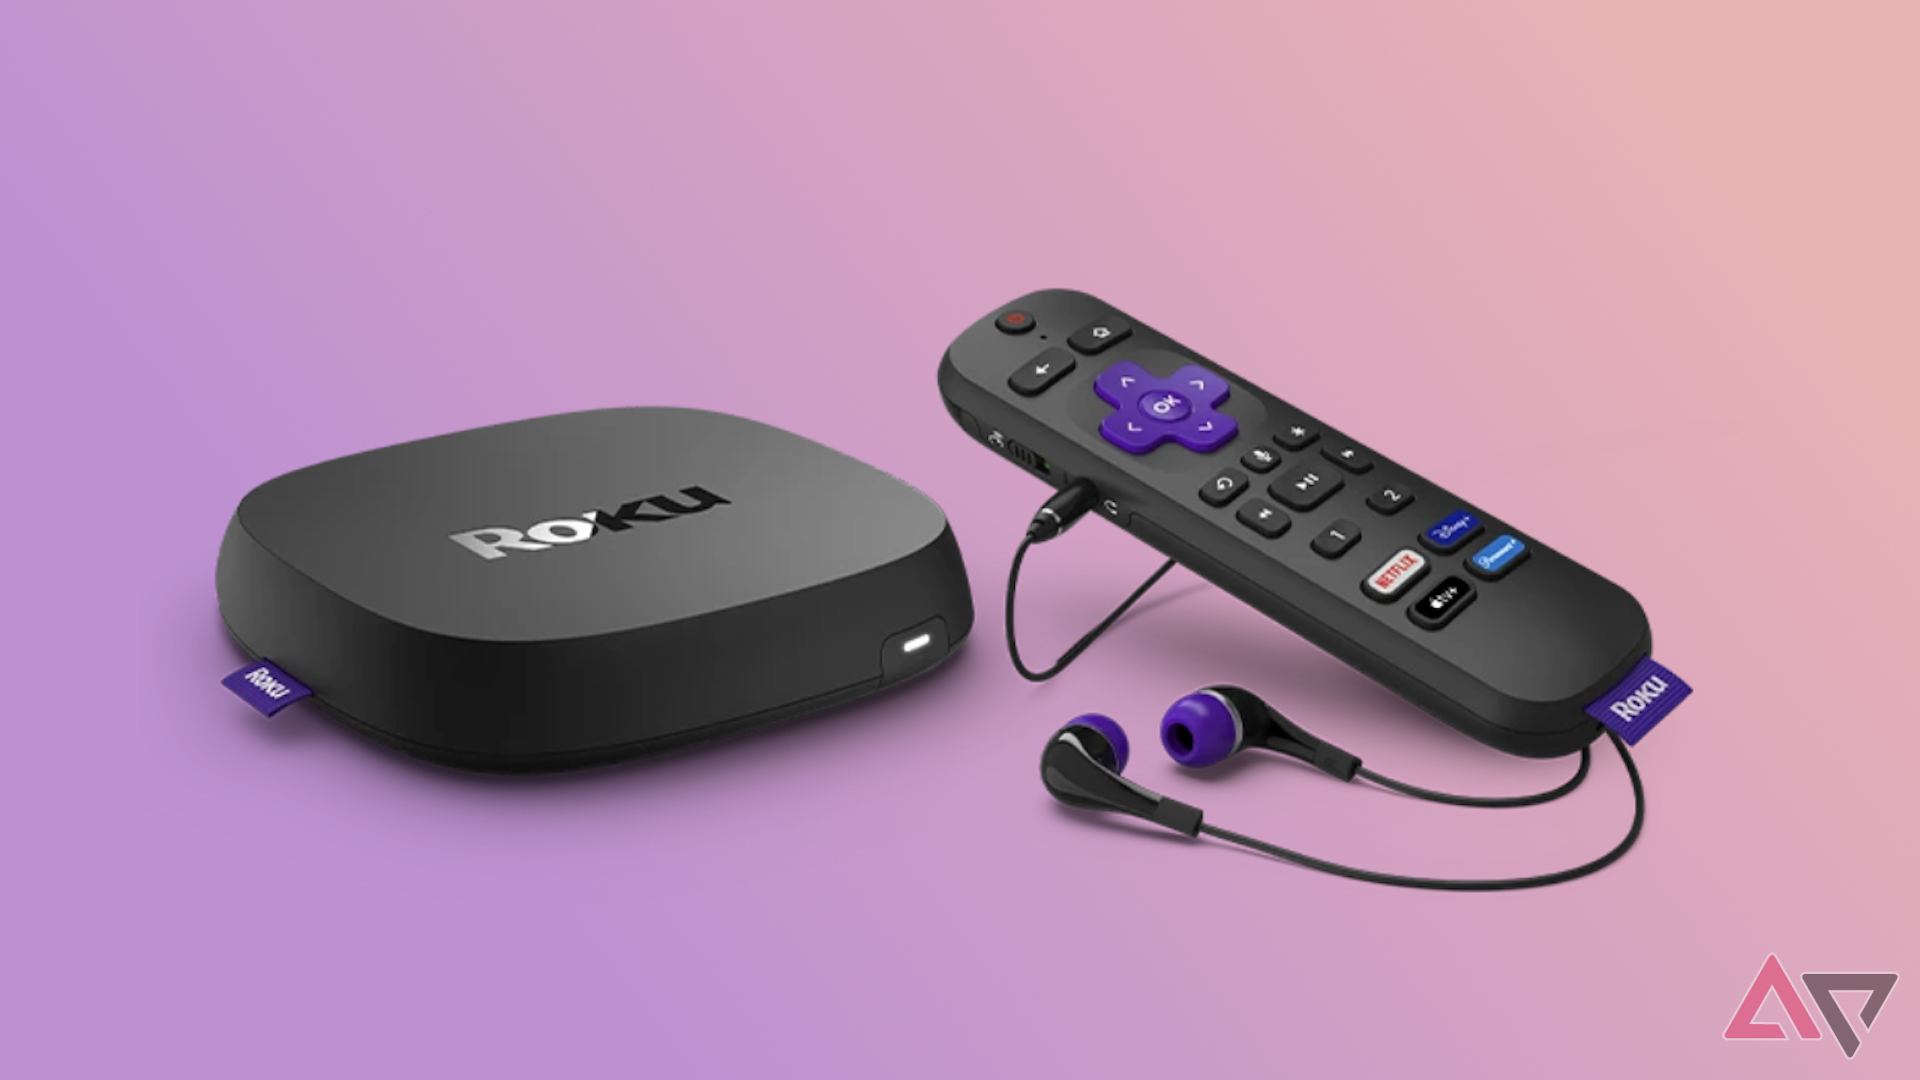 A Roku Ultra, remote, and earbuds against a purple background